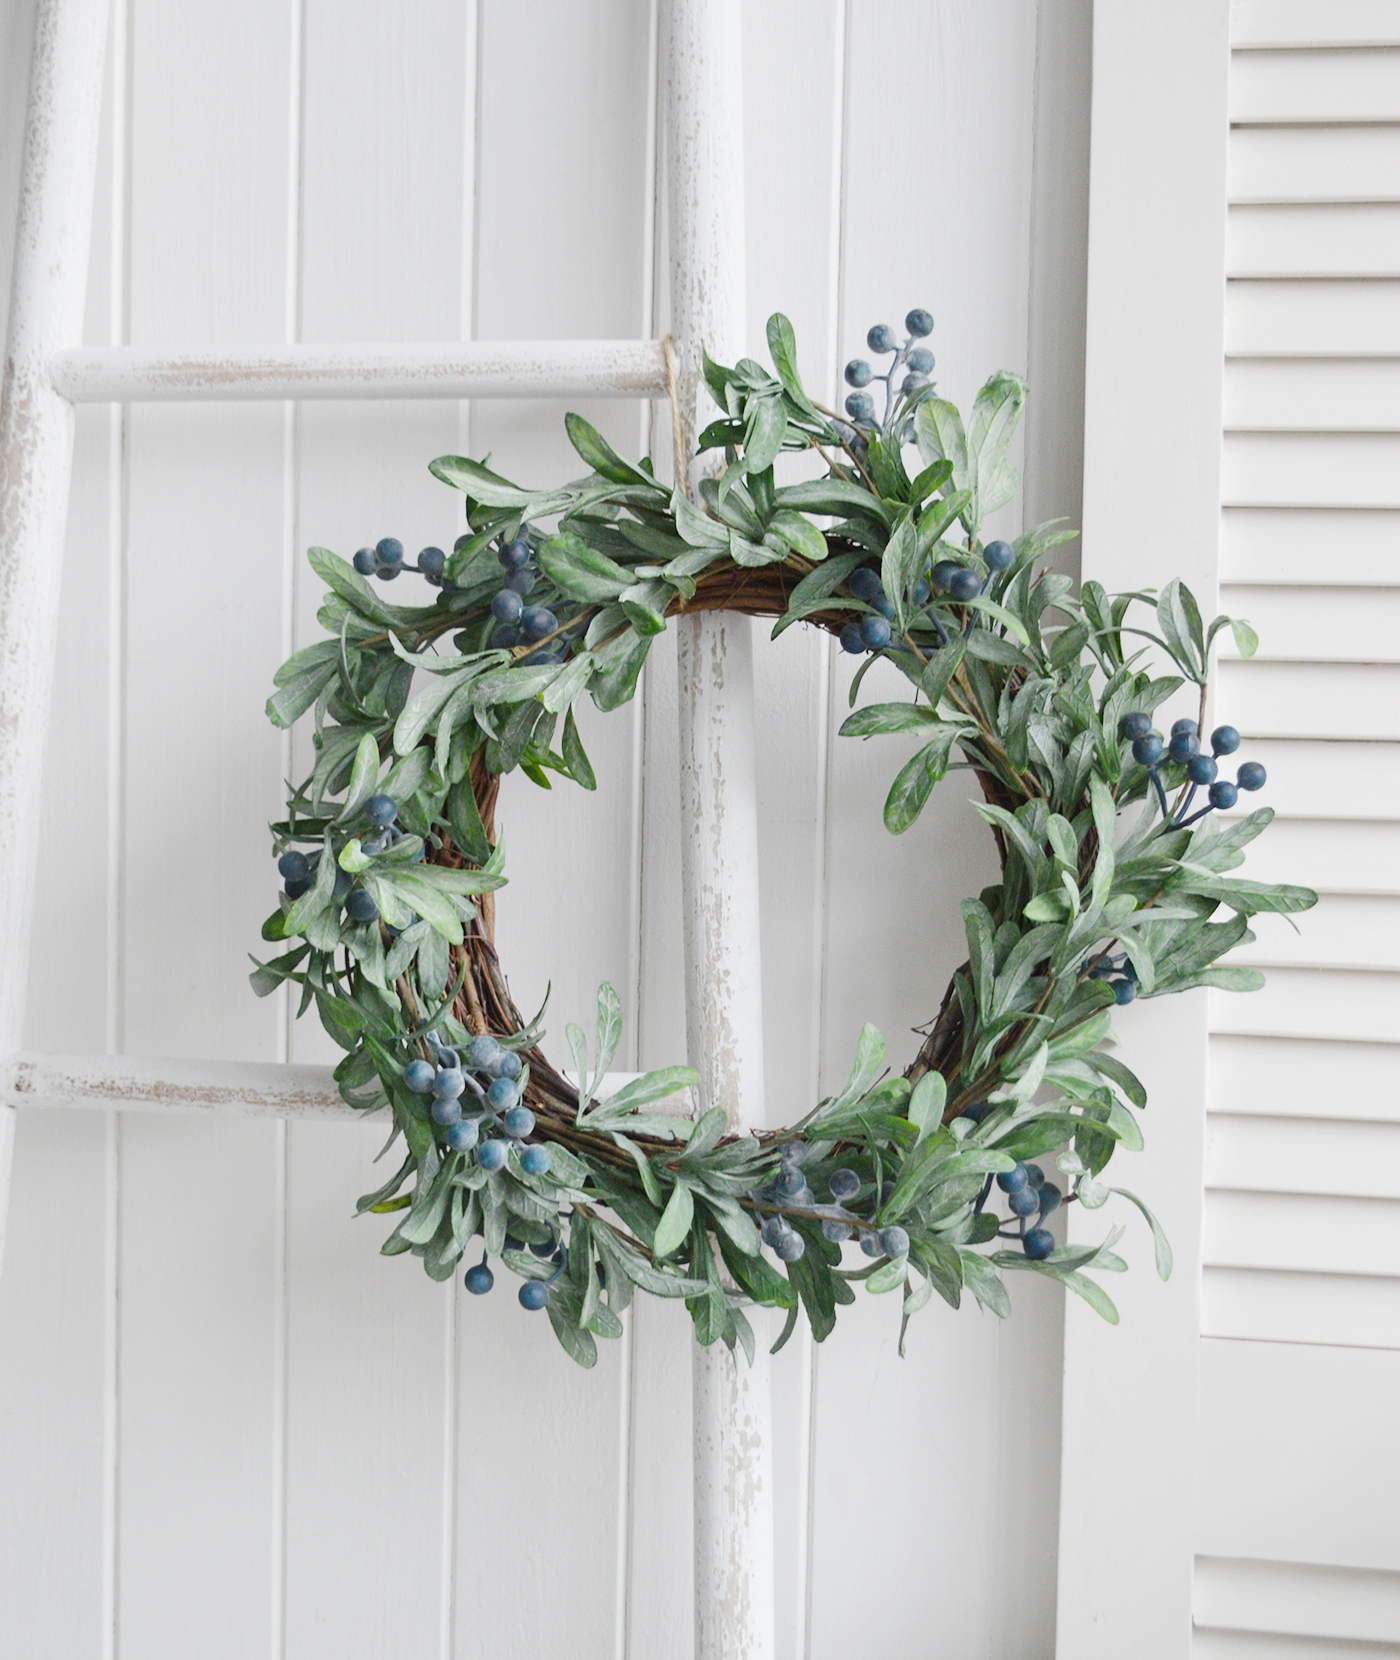 Large Blueberry Wreath for a traditional New England look to your room from The White Lighthouse Coastal and Country Furniture for the hallway, living room, bedroom and bathroom